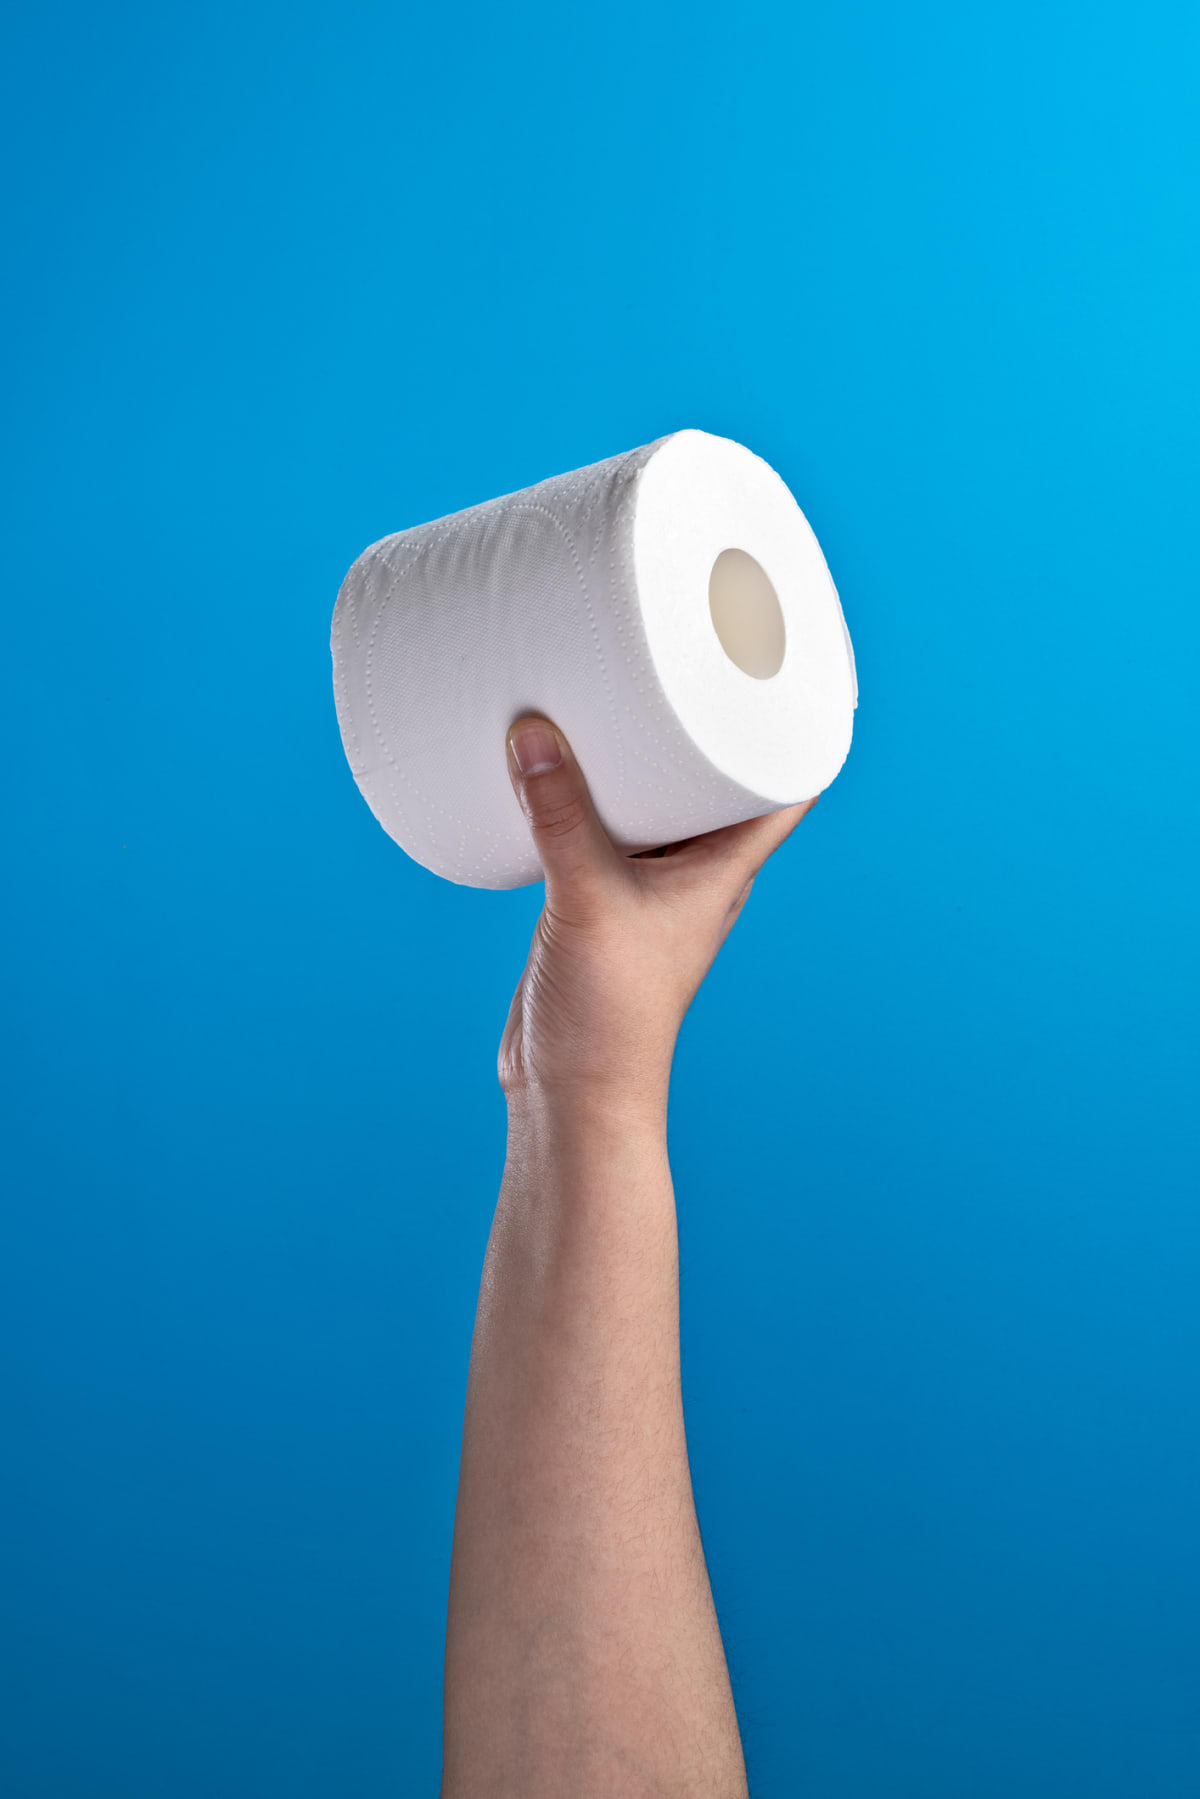 A hand holding a single roll of toilet paper against a blue background